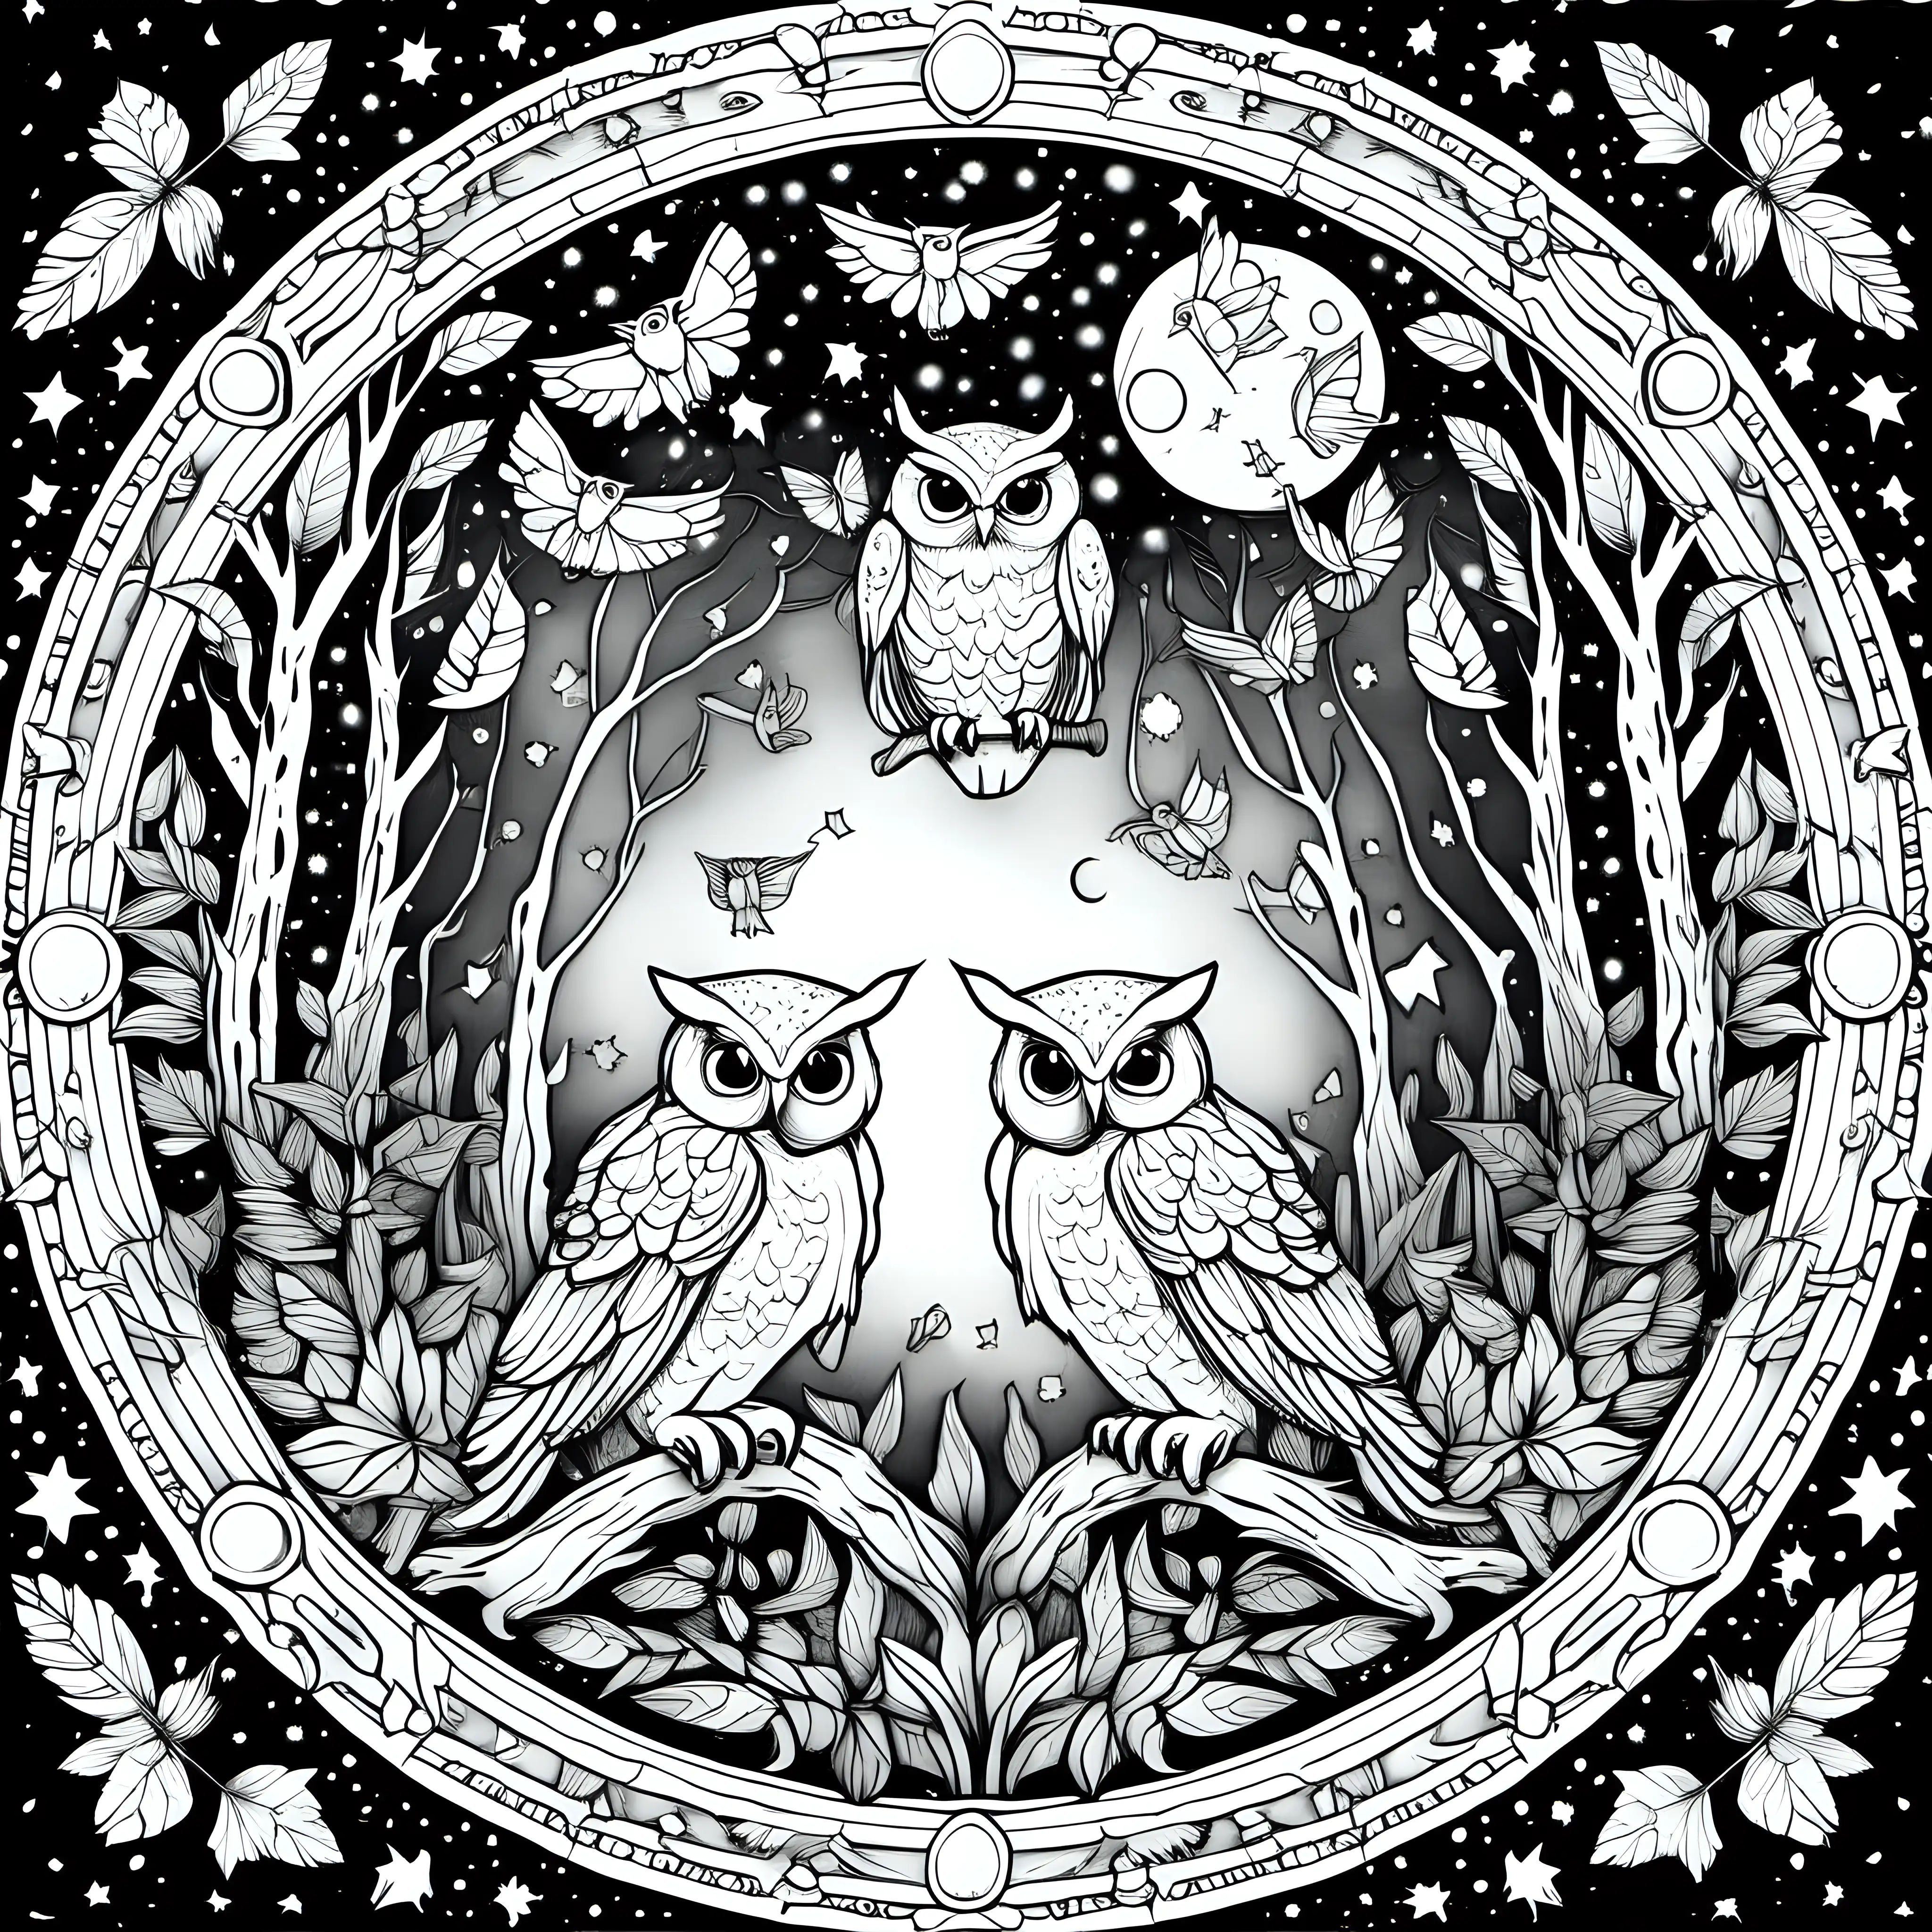 Enchanted Moonlit Forest Mandala Coloring Page with Owls and Fireflies